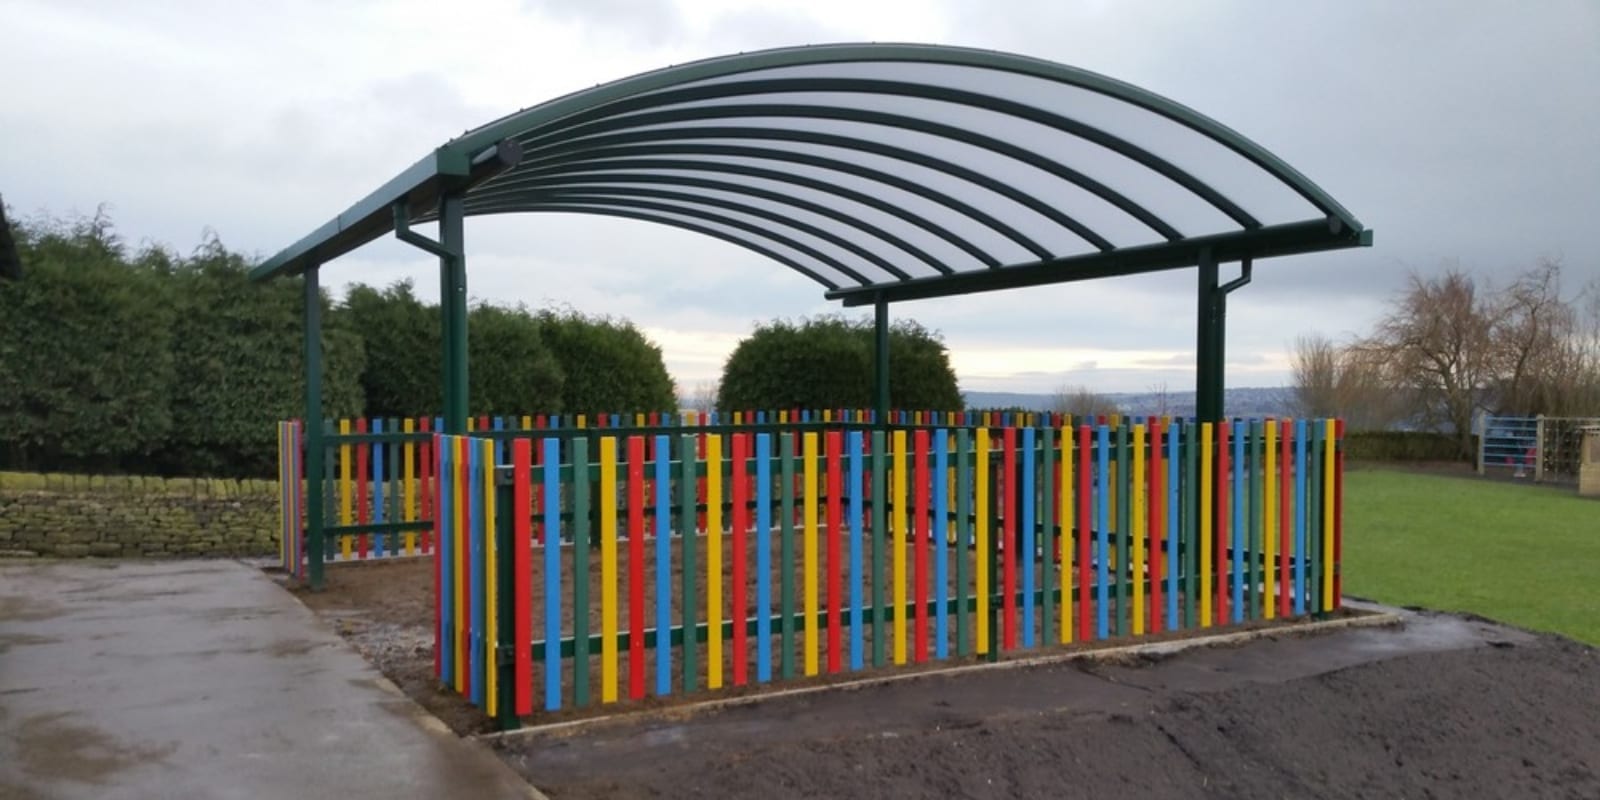 Hawksworth School Curved Roof Shelter